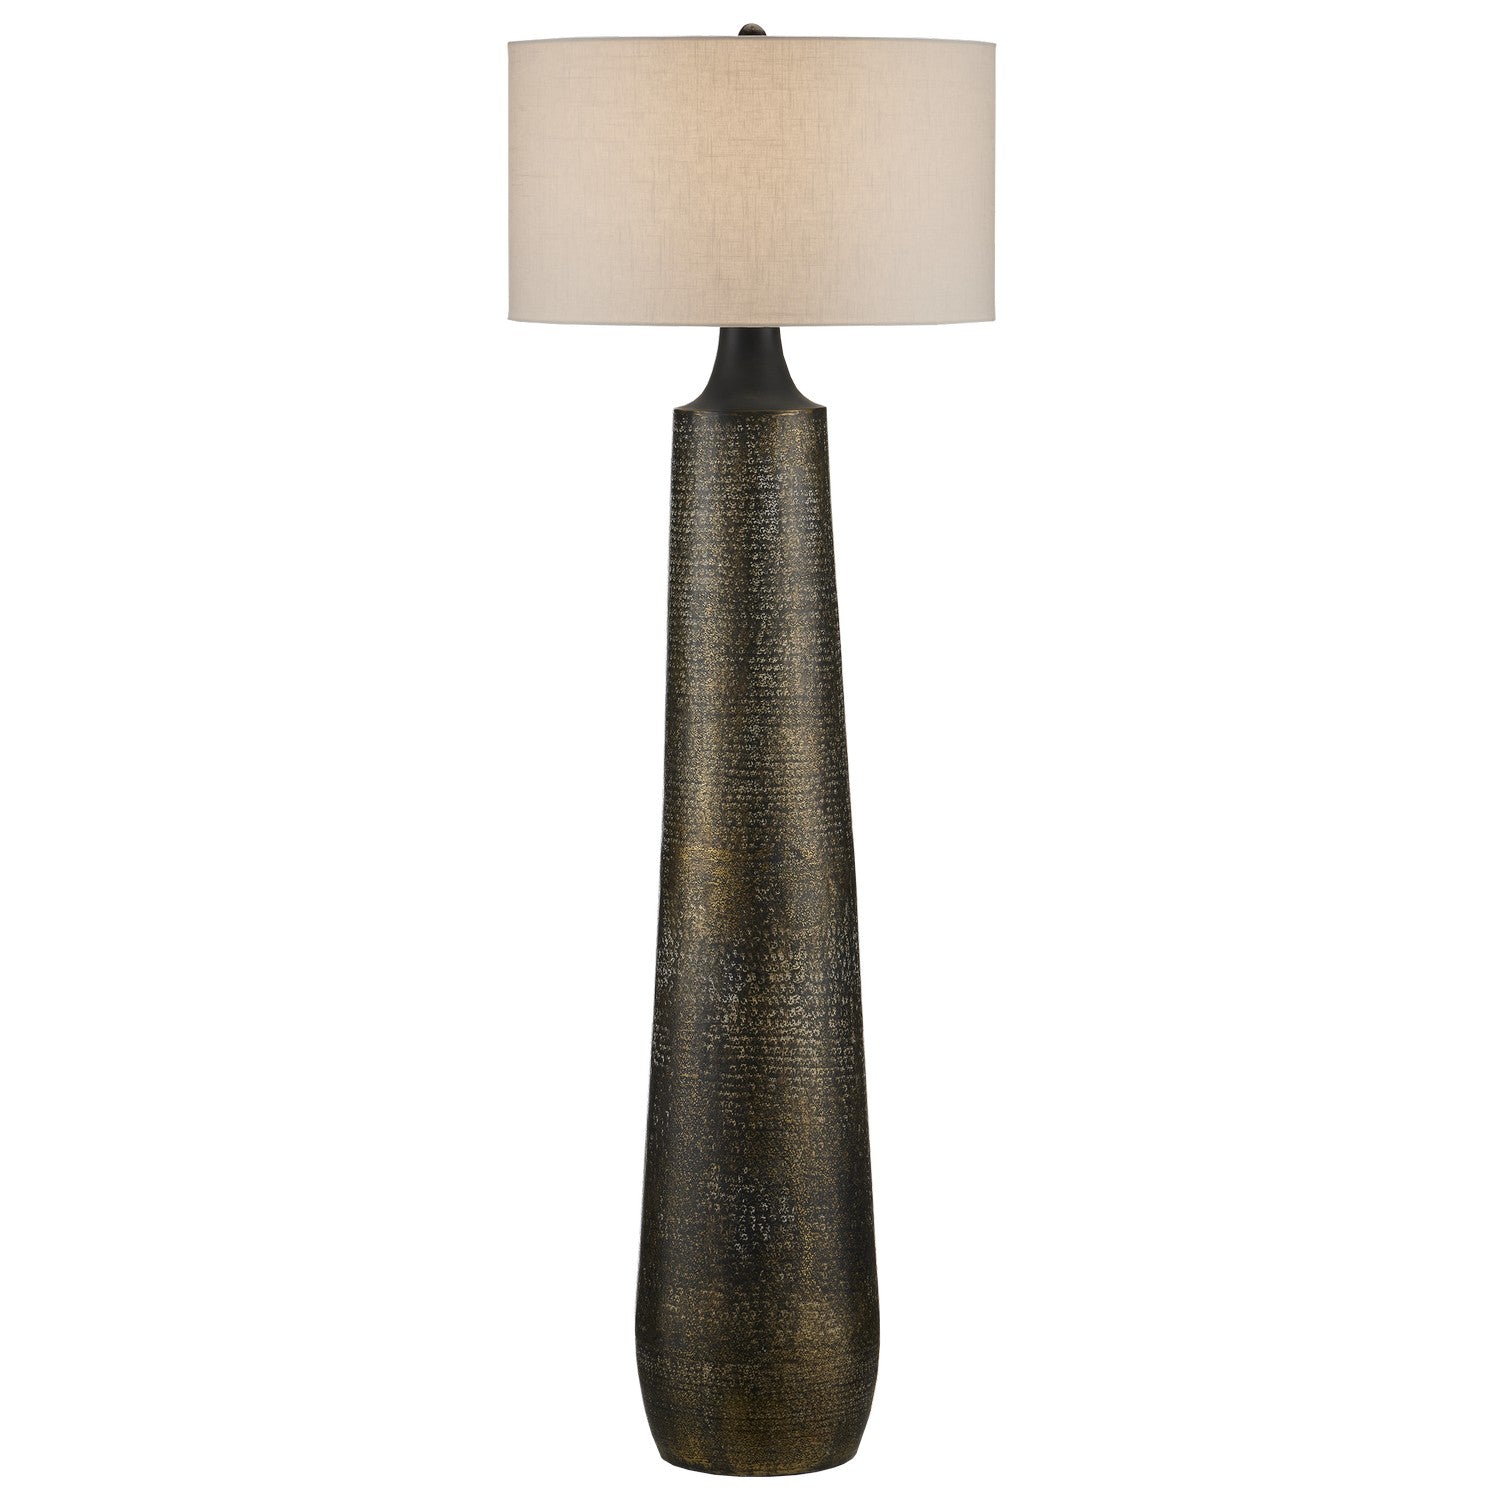 Currey and Company - 8000-0136 - One Light Floor Lamp - Antique Brass/Black/Whitewash